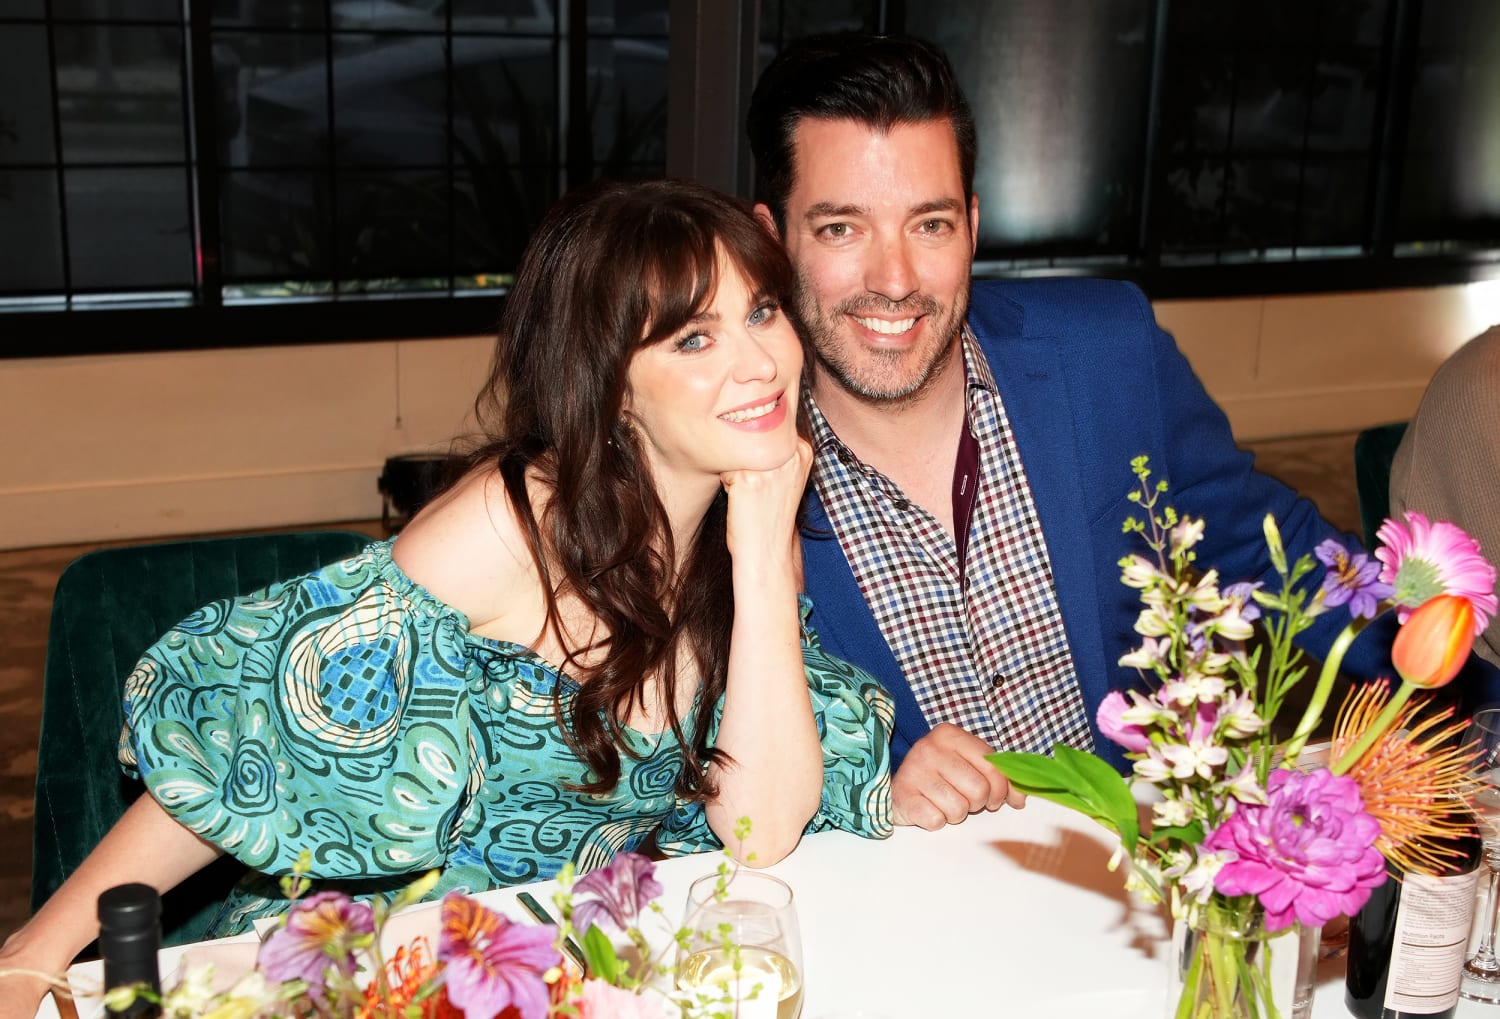 Zooey Deschanel and Jonathan Scott are engaged after 4 years of dating ...